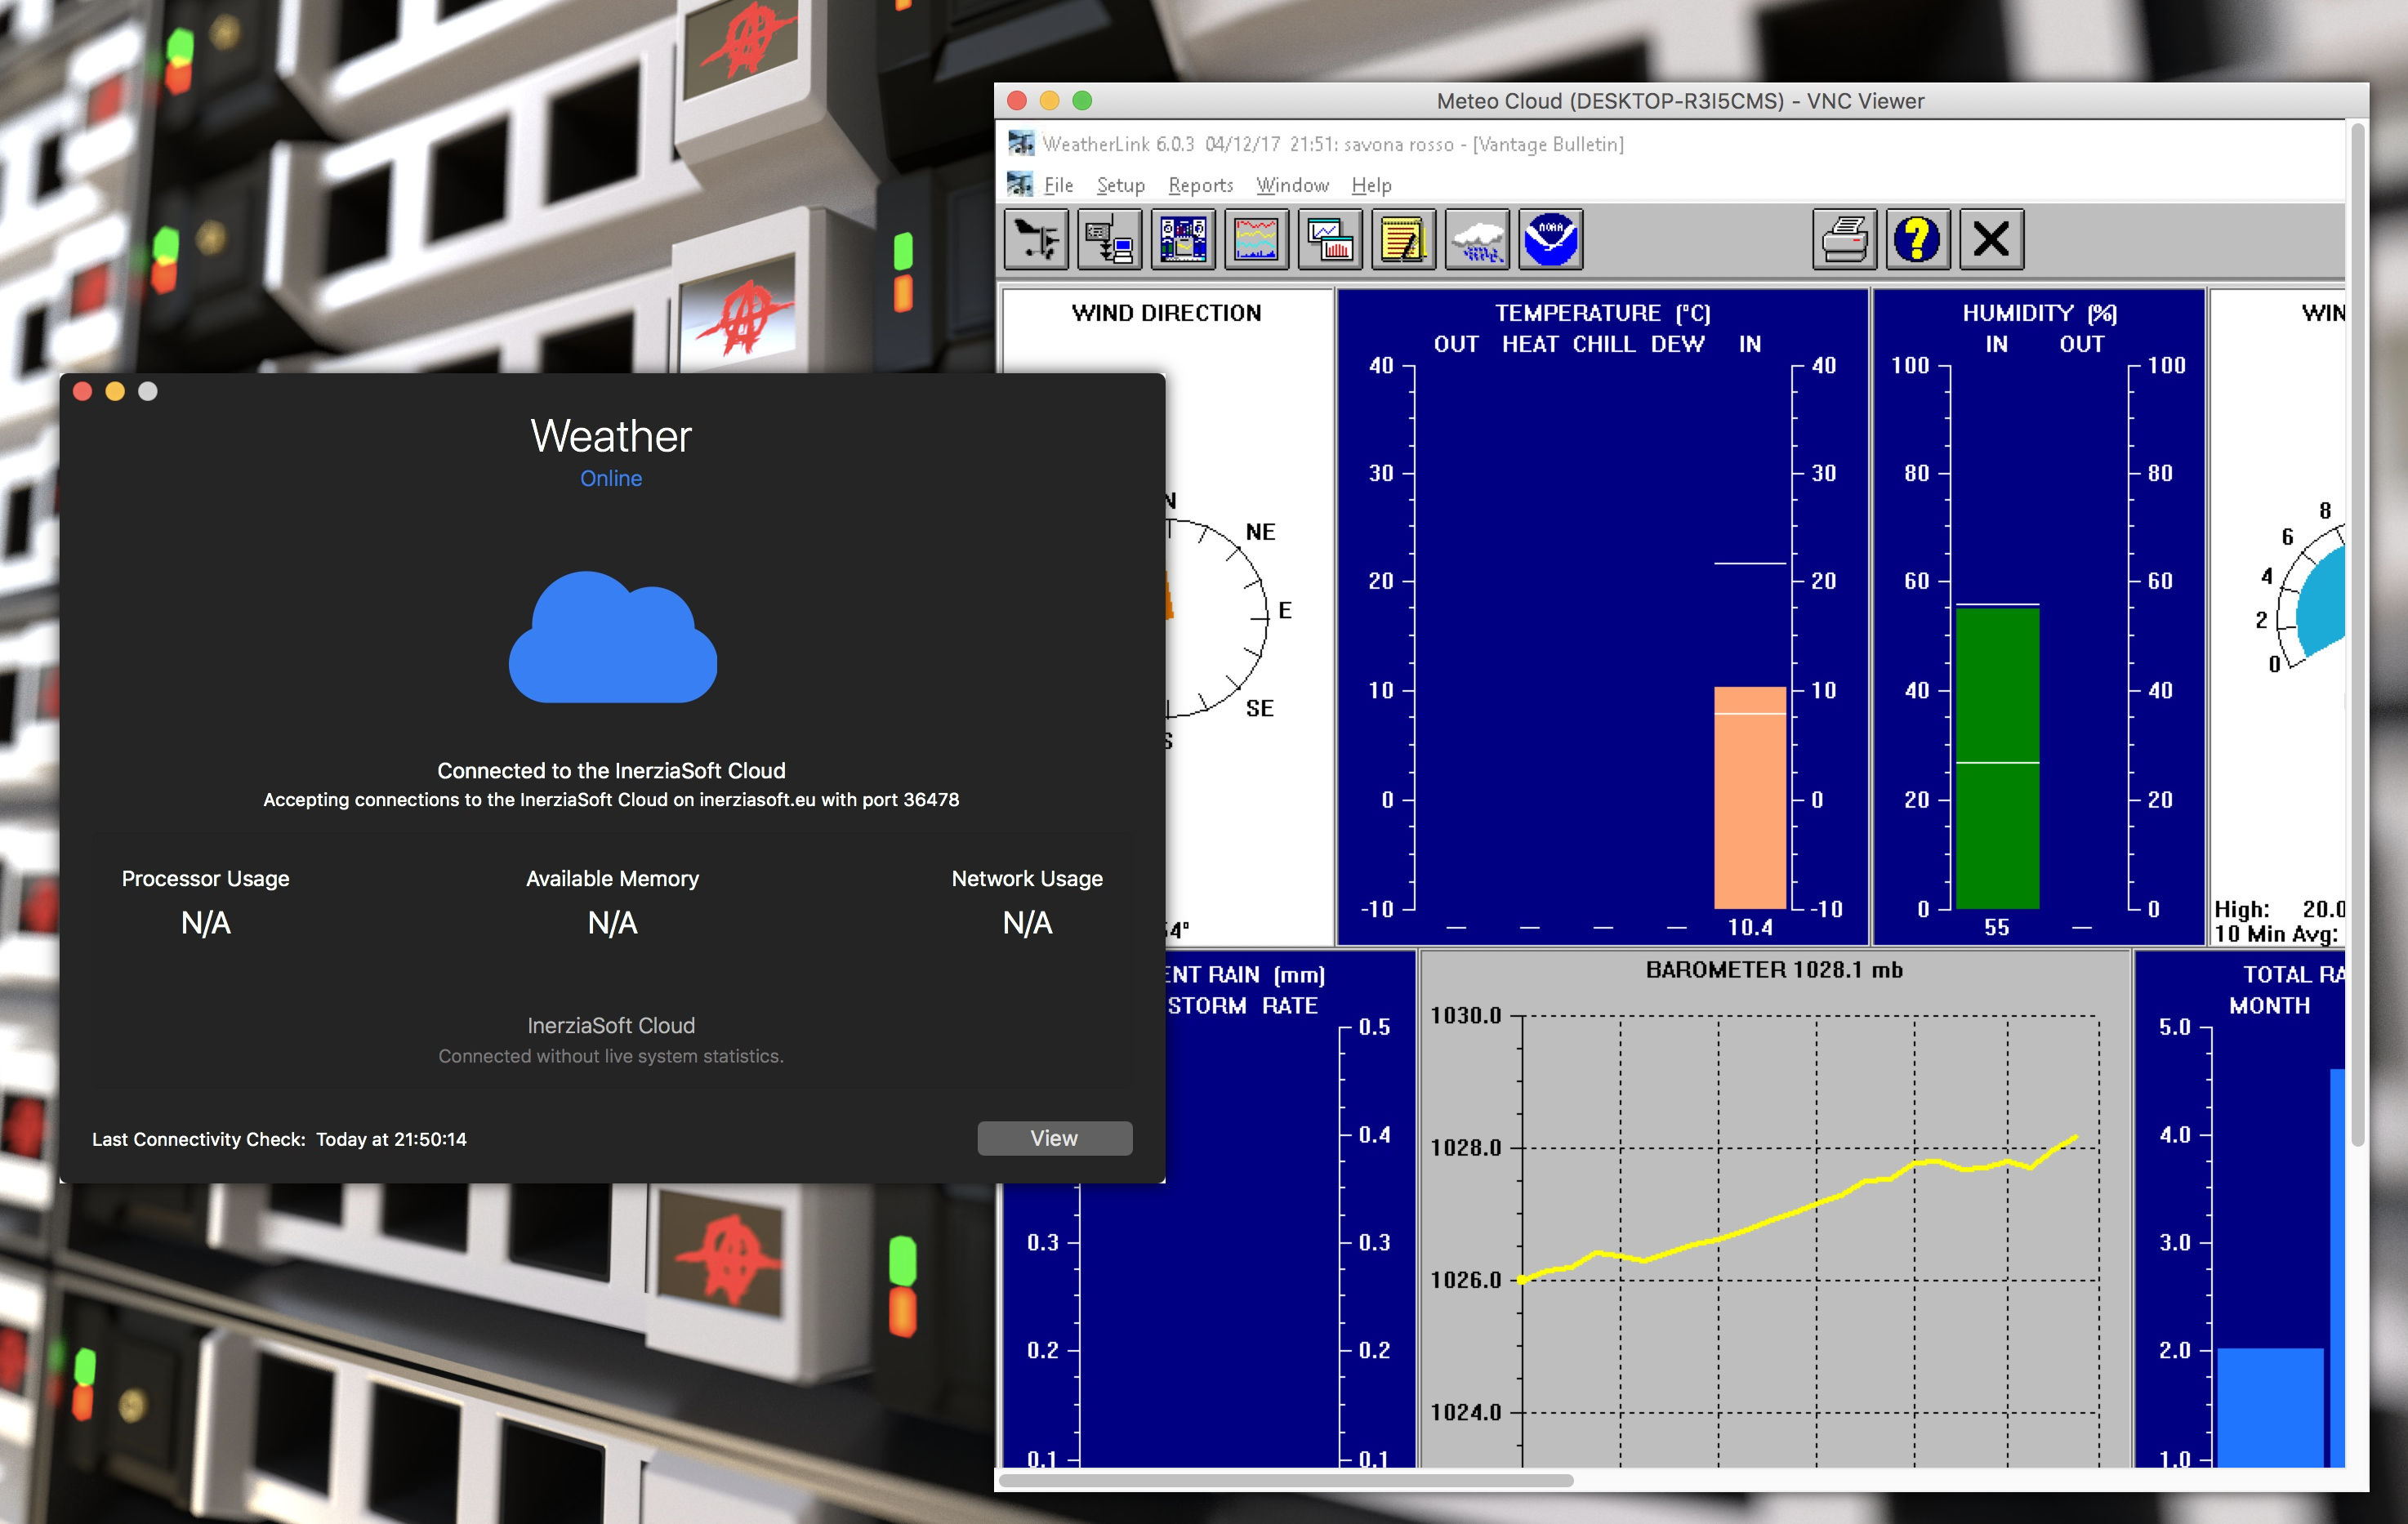 The Meteo app for macOS in the foreground with the offline device running in our Cloud in the background.